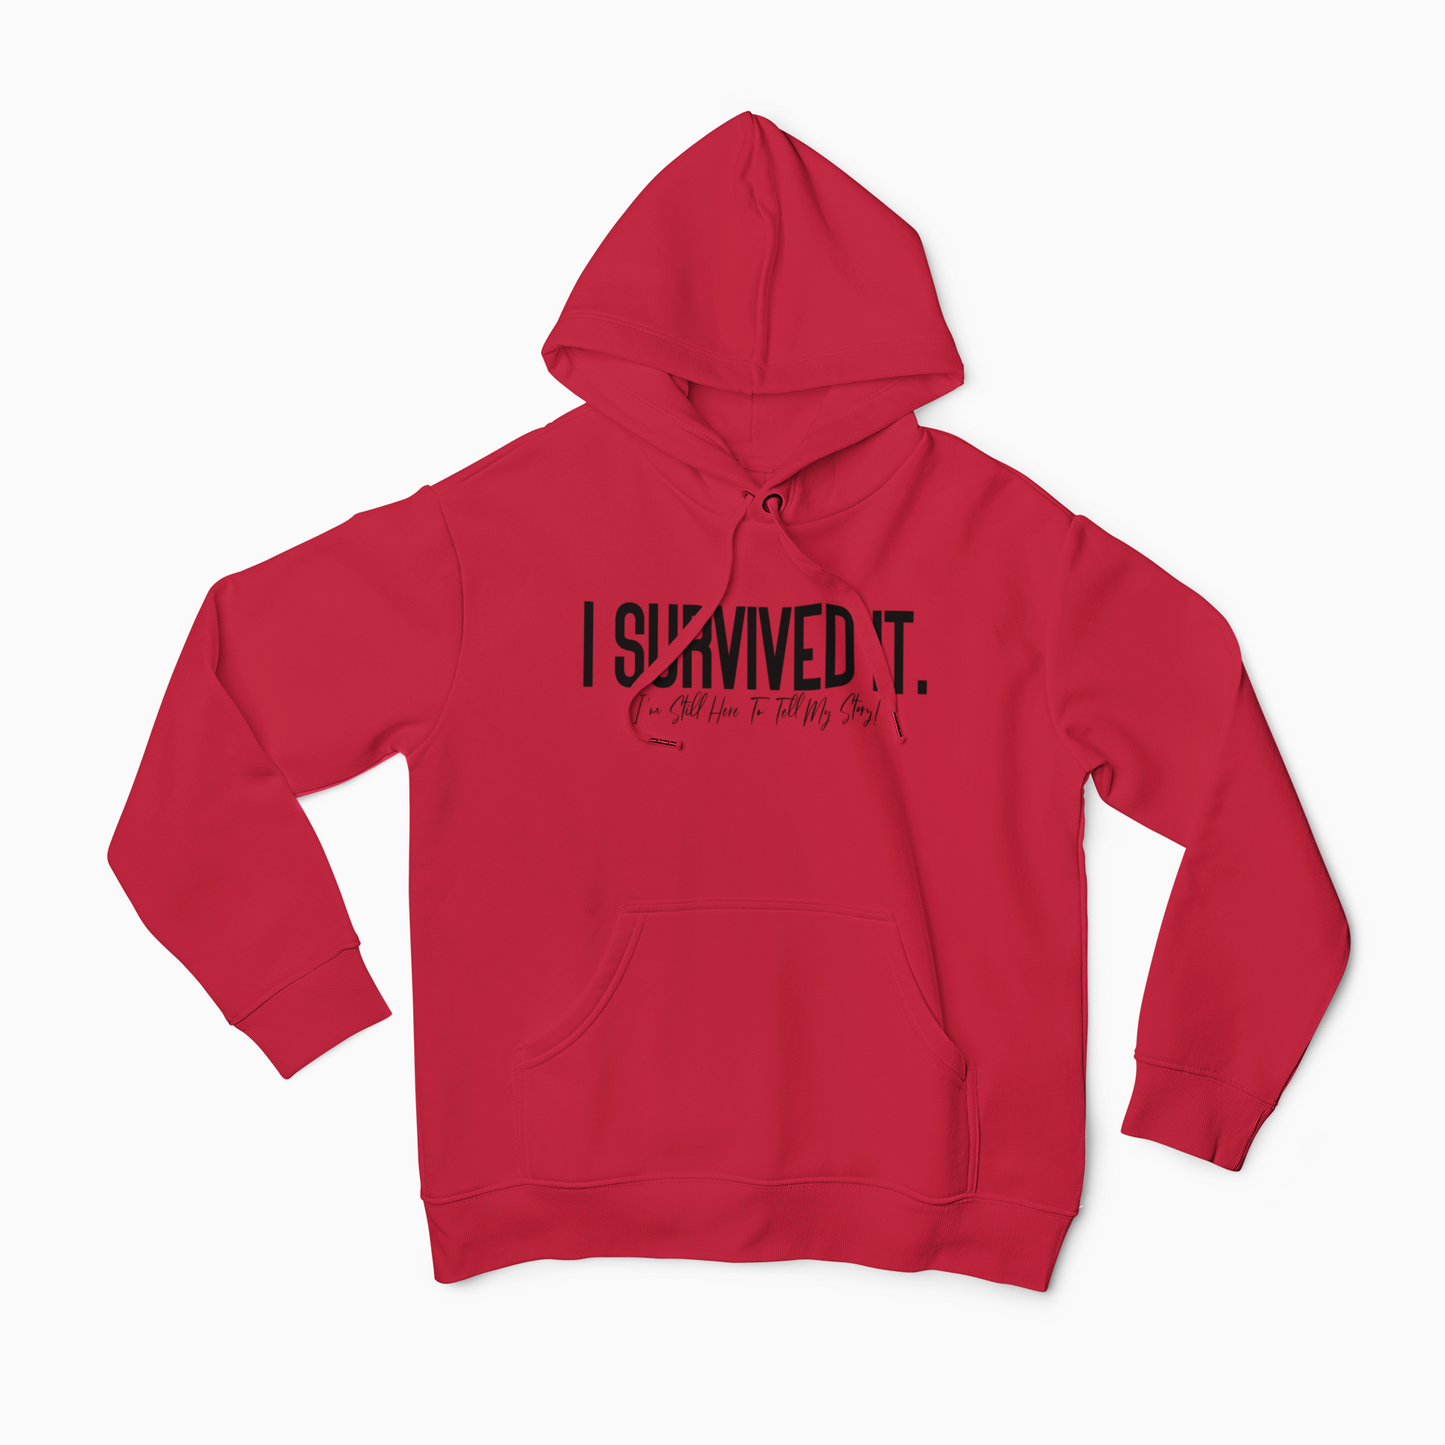 Buy our I Survived It Statement Apparel. This red Christian hoodie is unisex and so soft & comfortable, you can wear it everyday. This hoodie has a powerful statement that will spark a conversation about your faith.